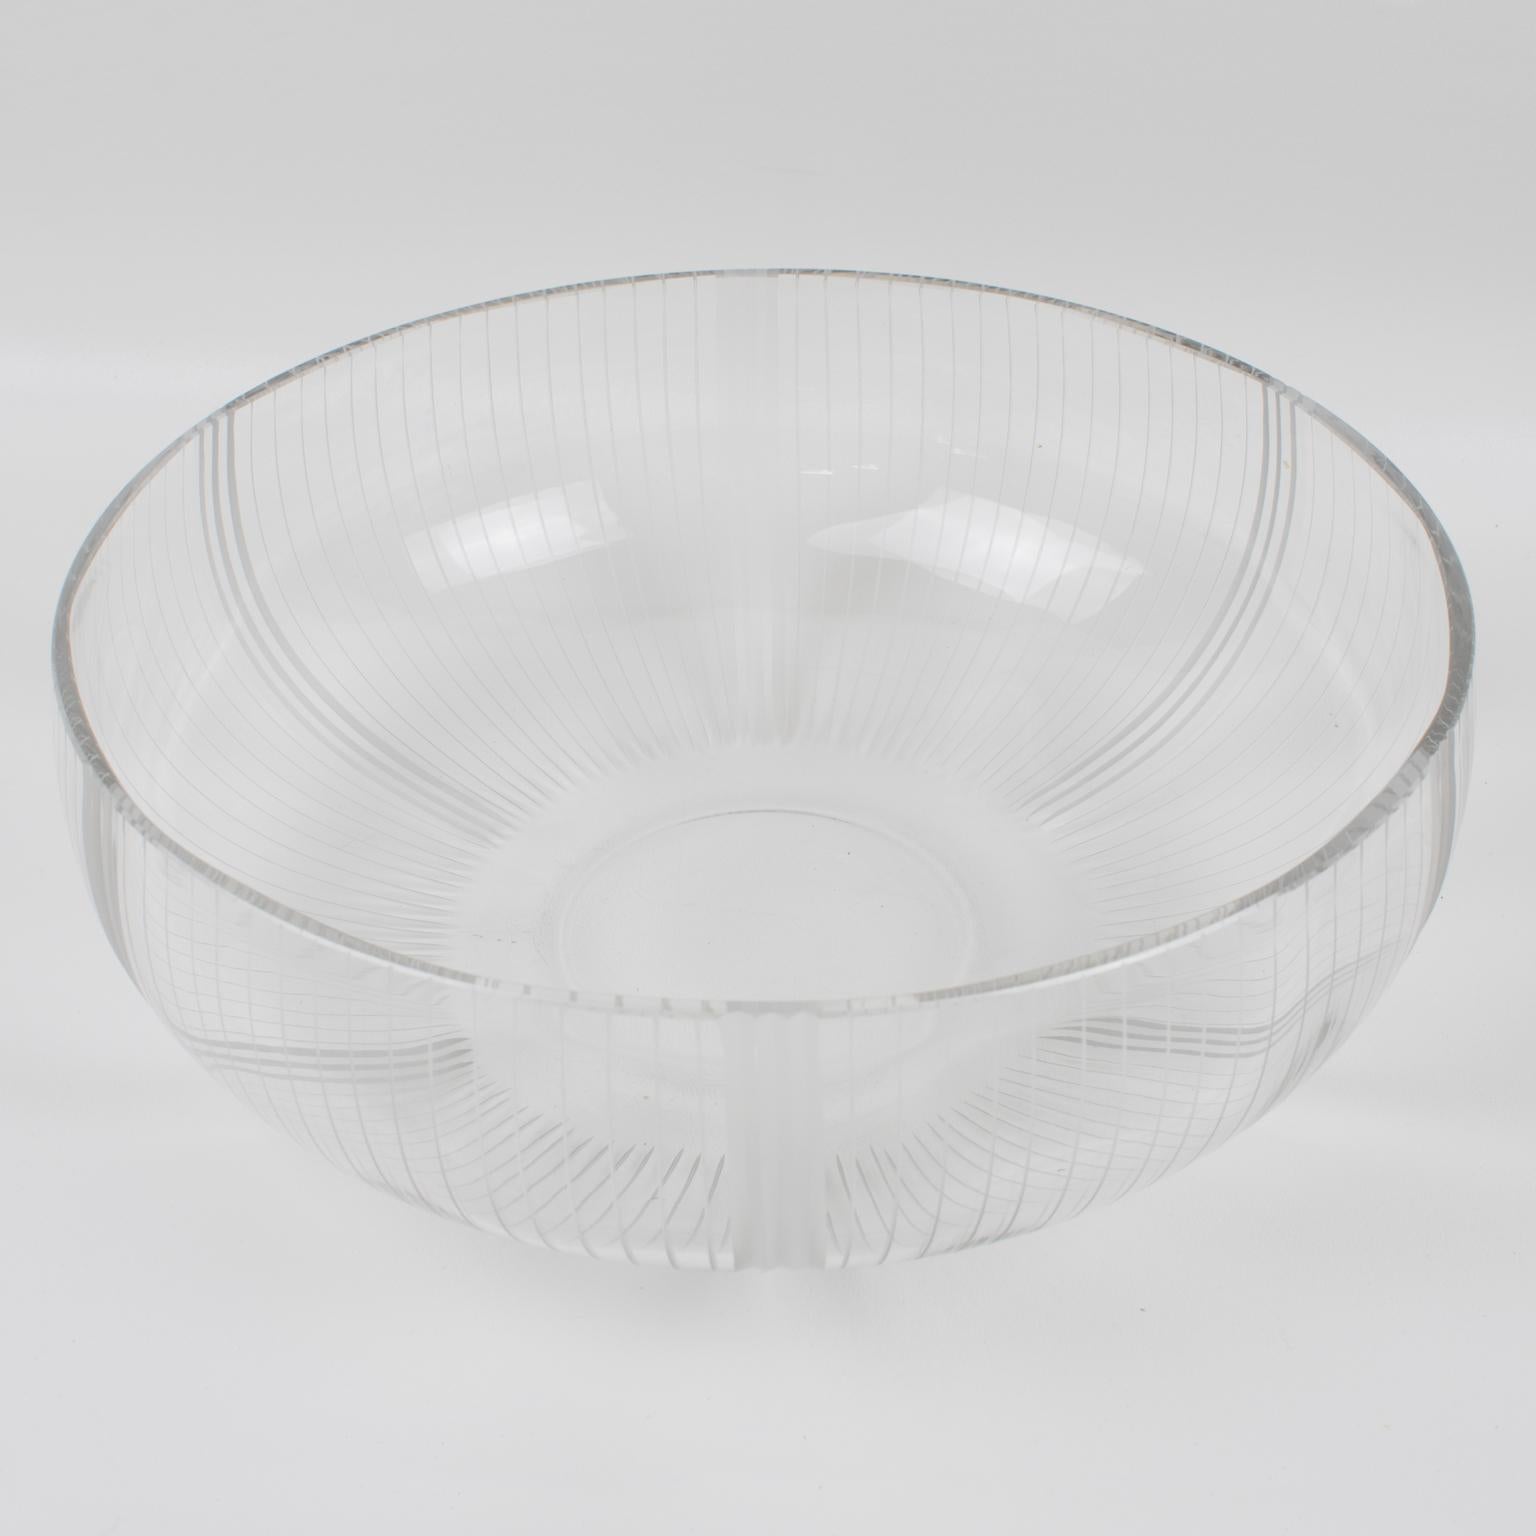 French Art Deco Macassar Wood and Crystal Centerpiece Bowl For Sale 9